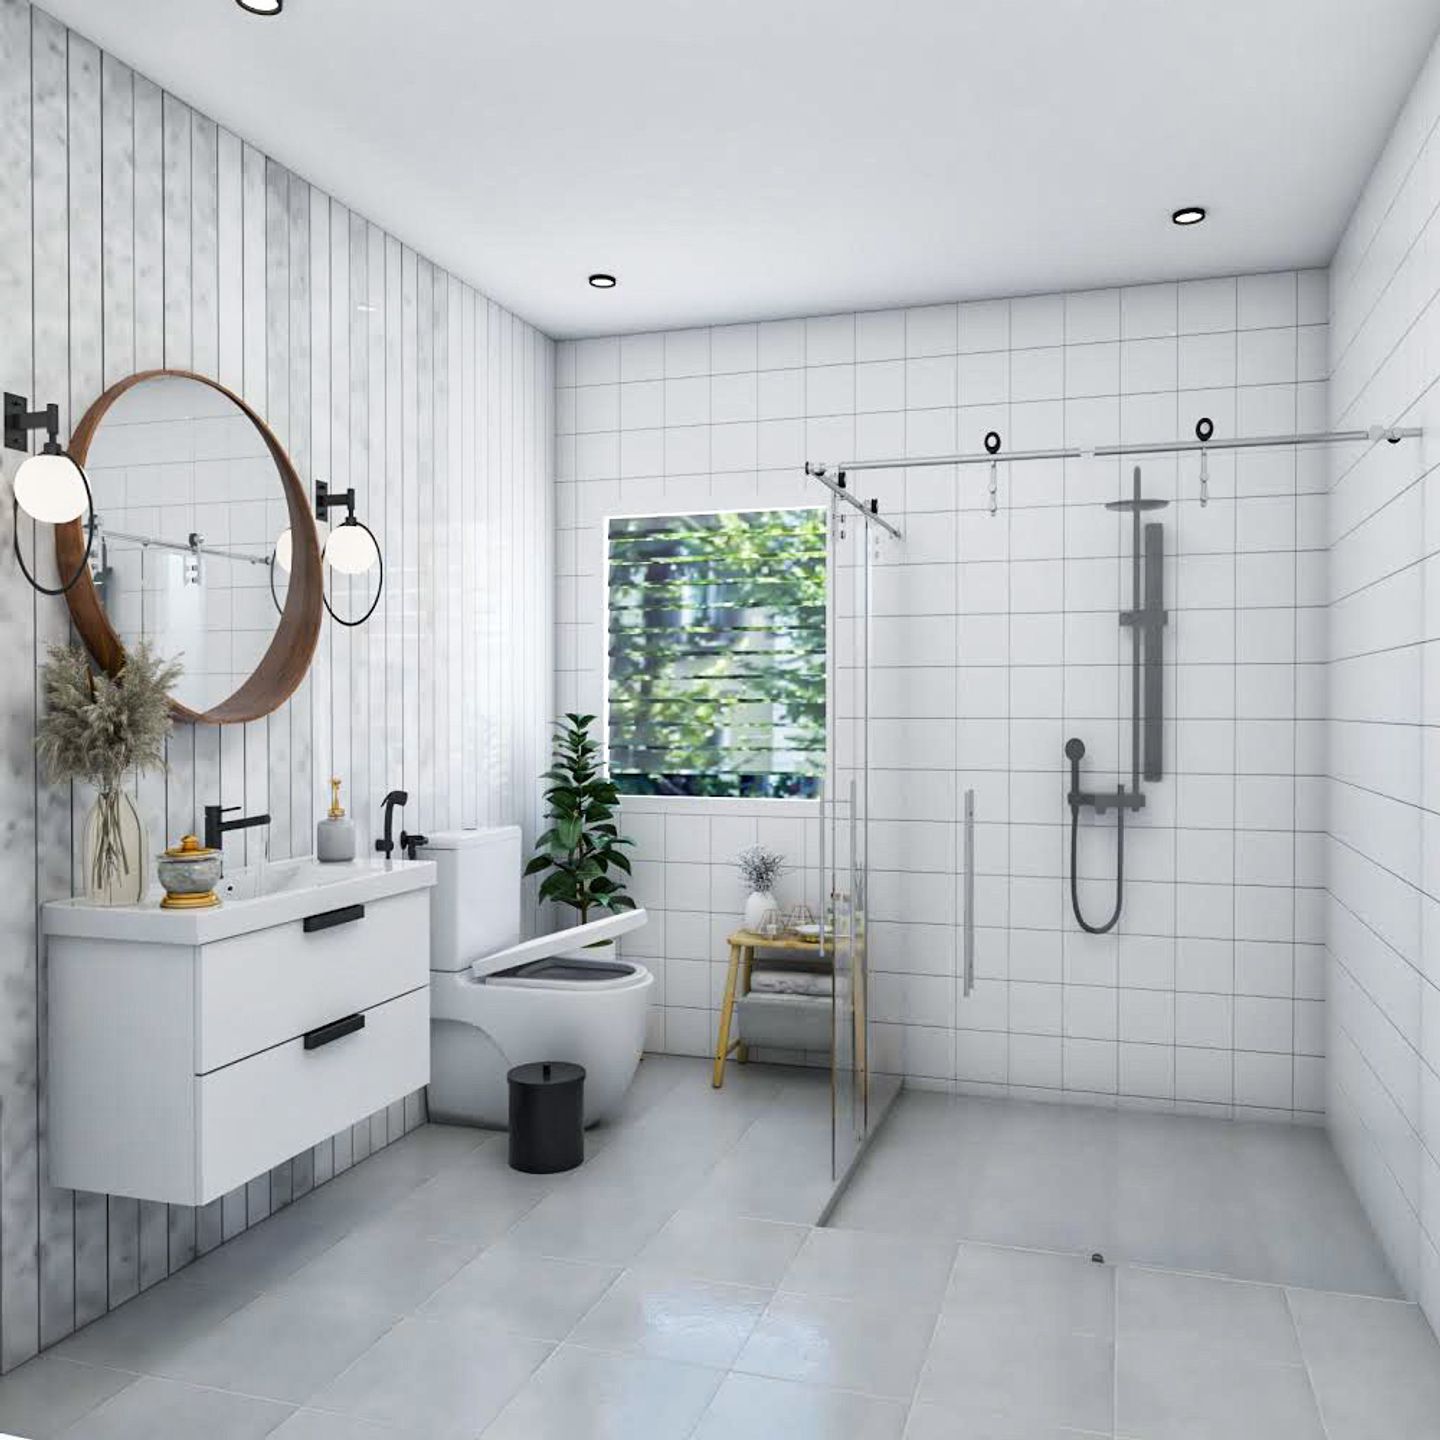 White Bathroom Interior Design With Wall-Mounted Storage - Livspace